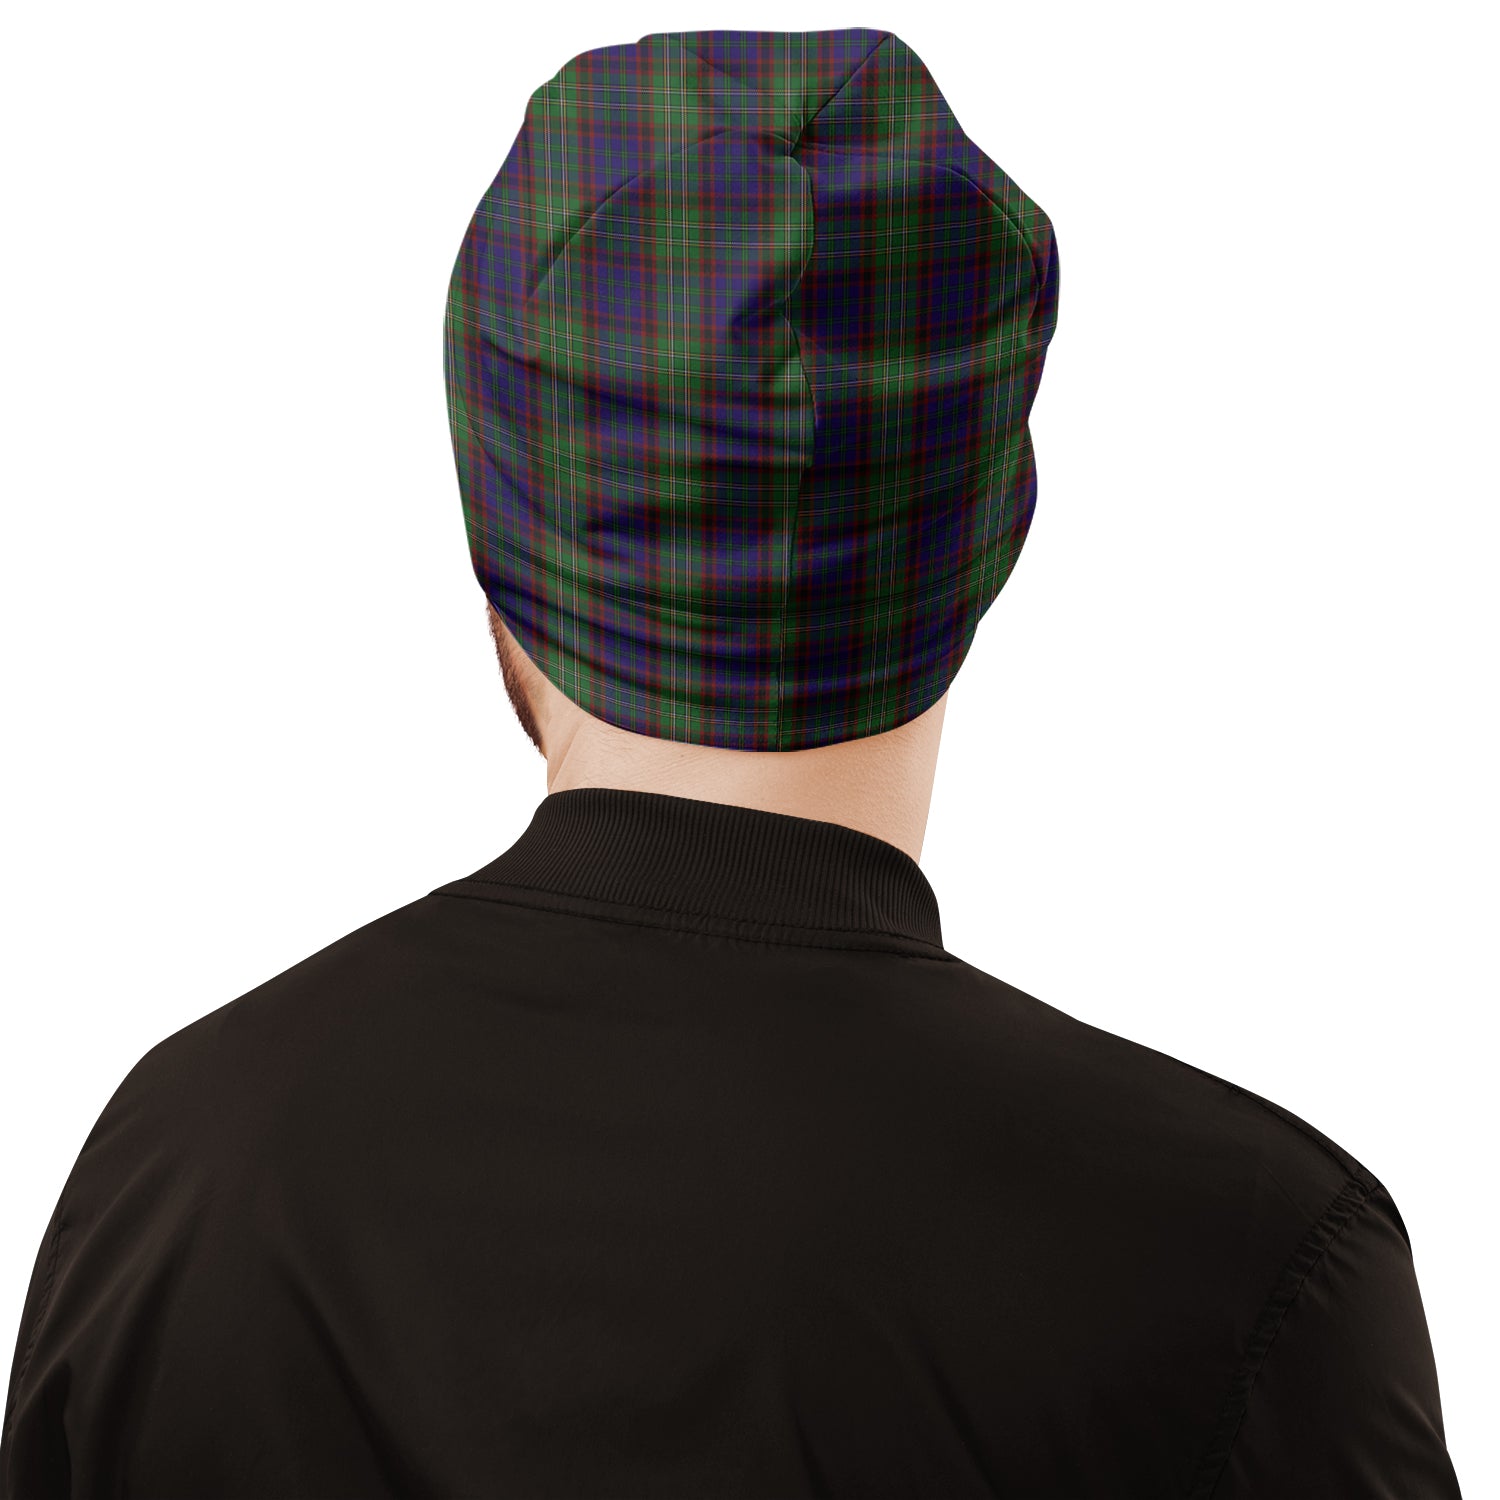 cunningham-hunting-tartan-beanies-hat-with-family-crest